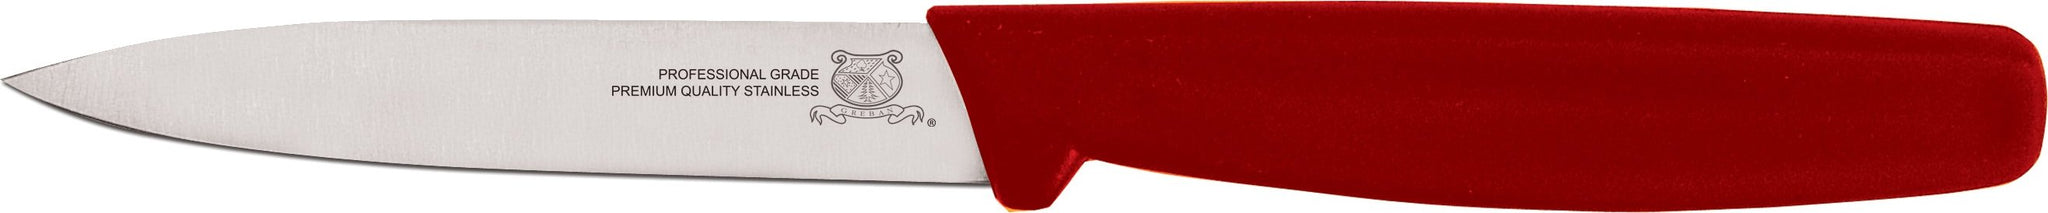 Omcan - 3.25” Paring Knife with Red Polypropylene Handle, 25/cs - 11537